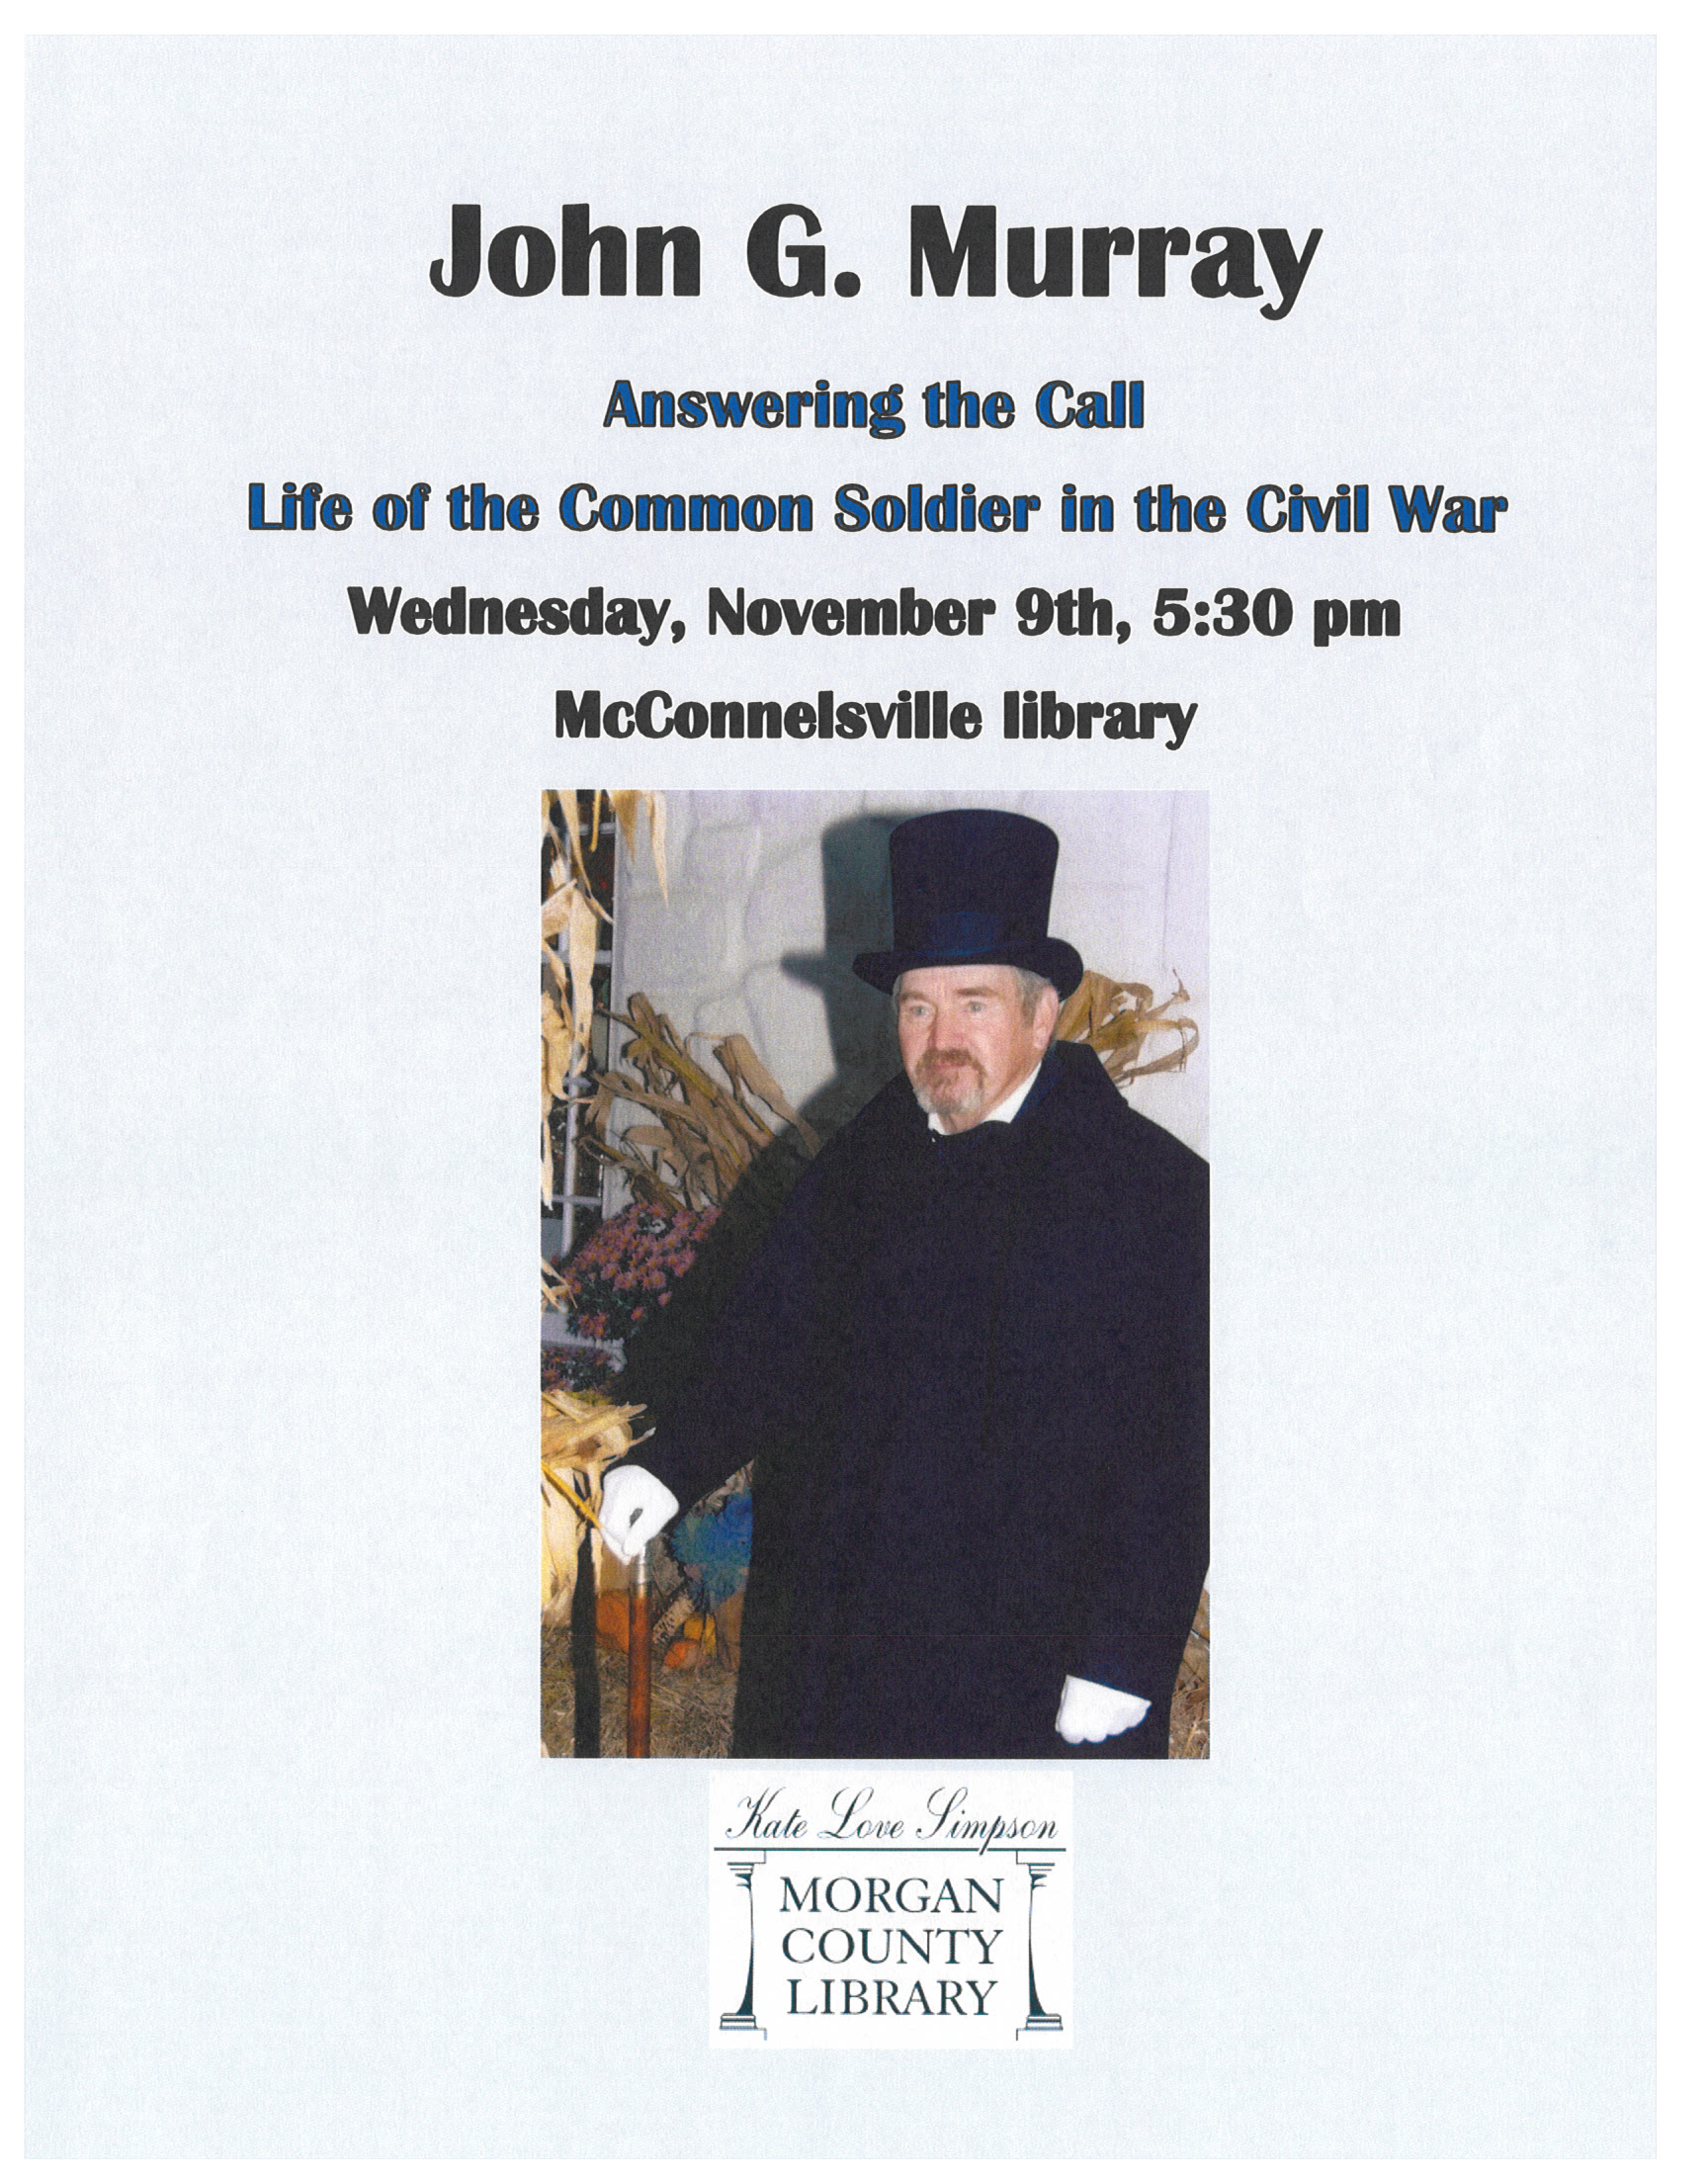 A flyer for the John Murray event, featuring an image of John Murray wearing a top hat.